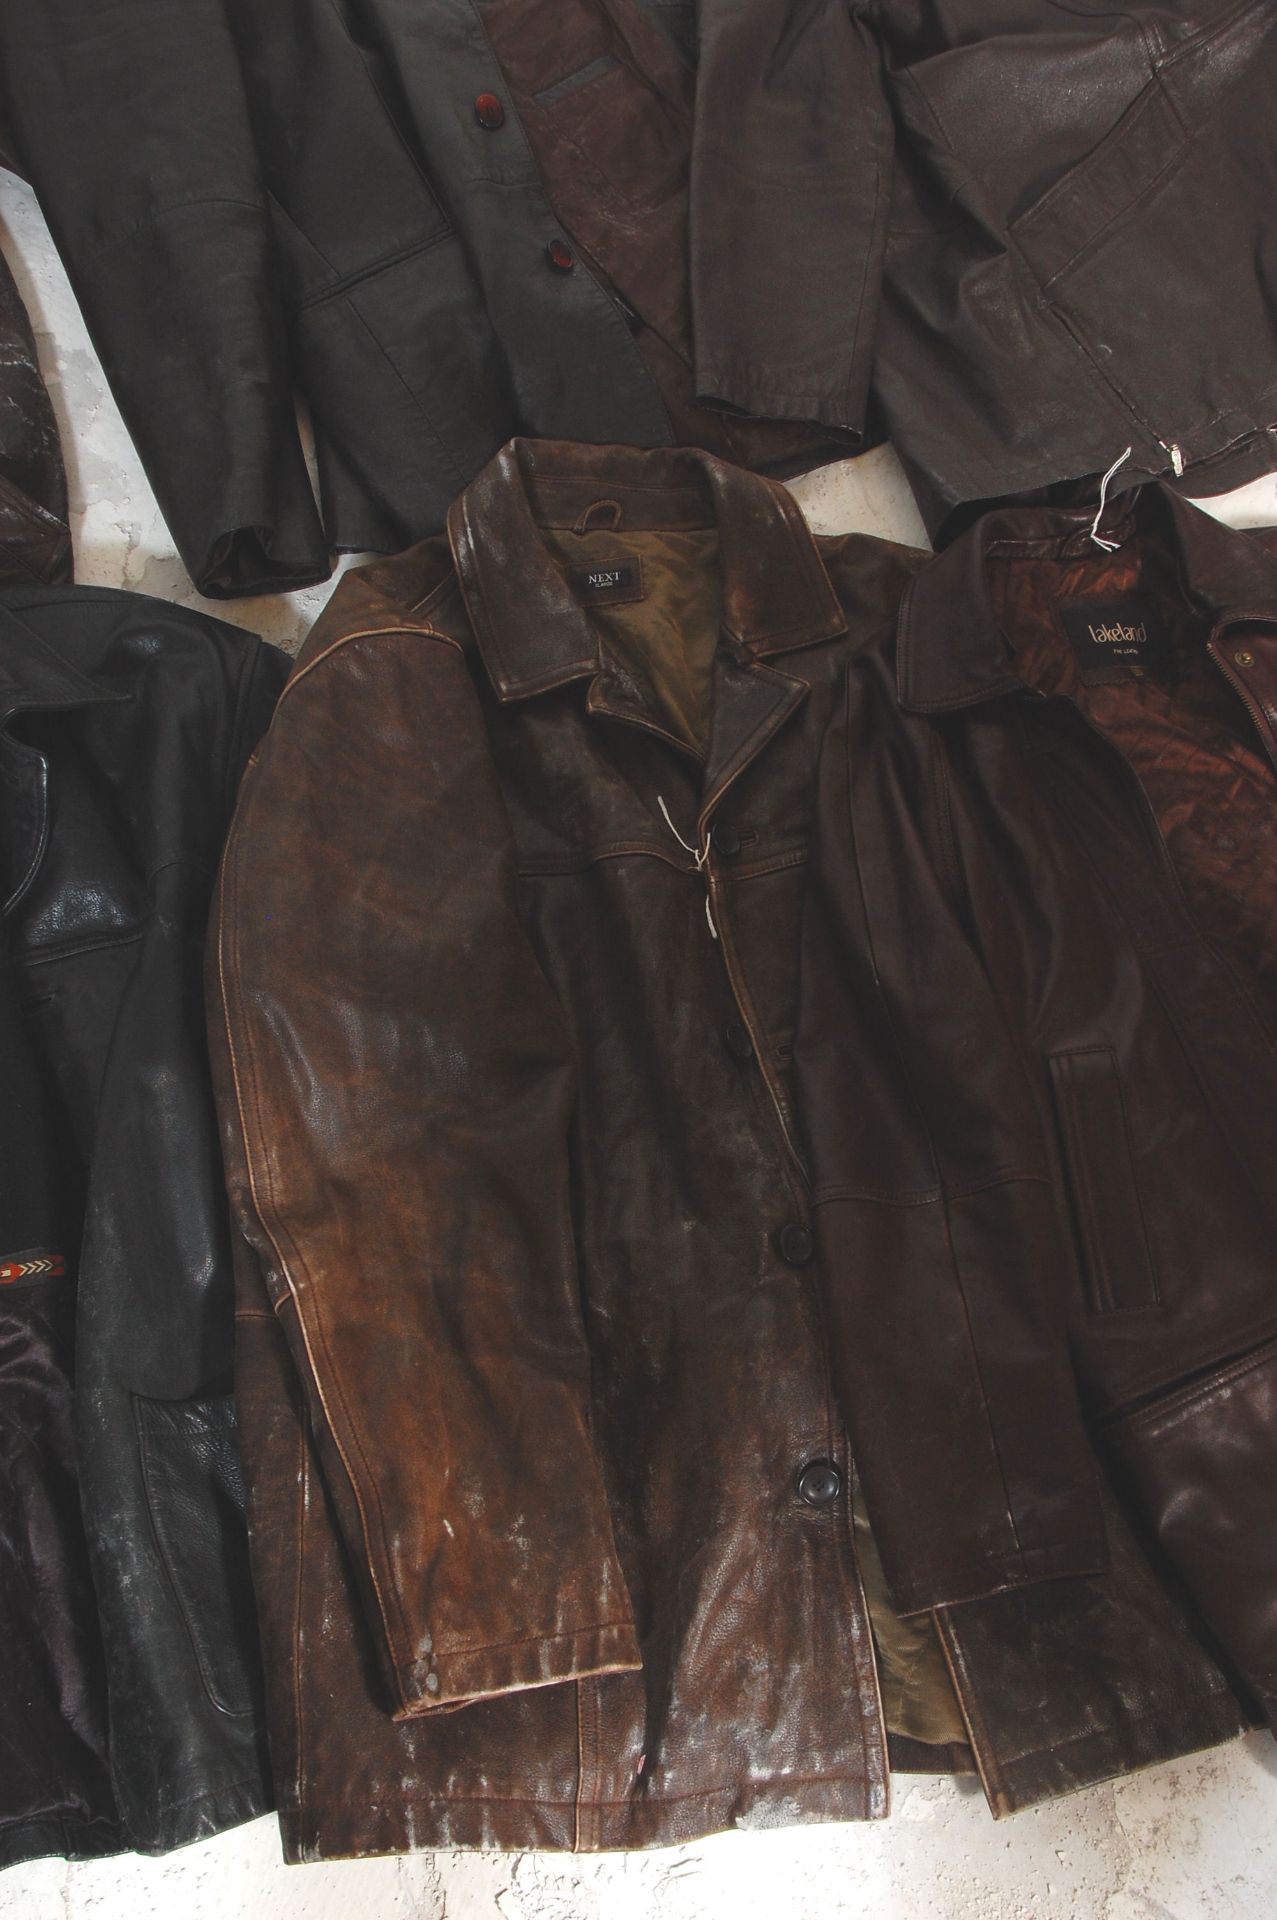 A good group of six gentlemens leather jackets / coats. Most bearing labels to include Milan - Bild 4 aus 6